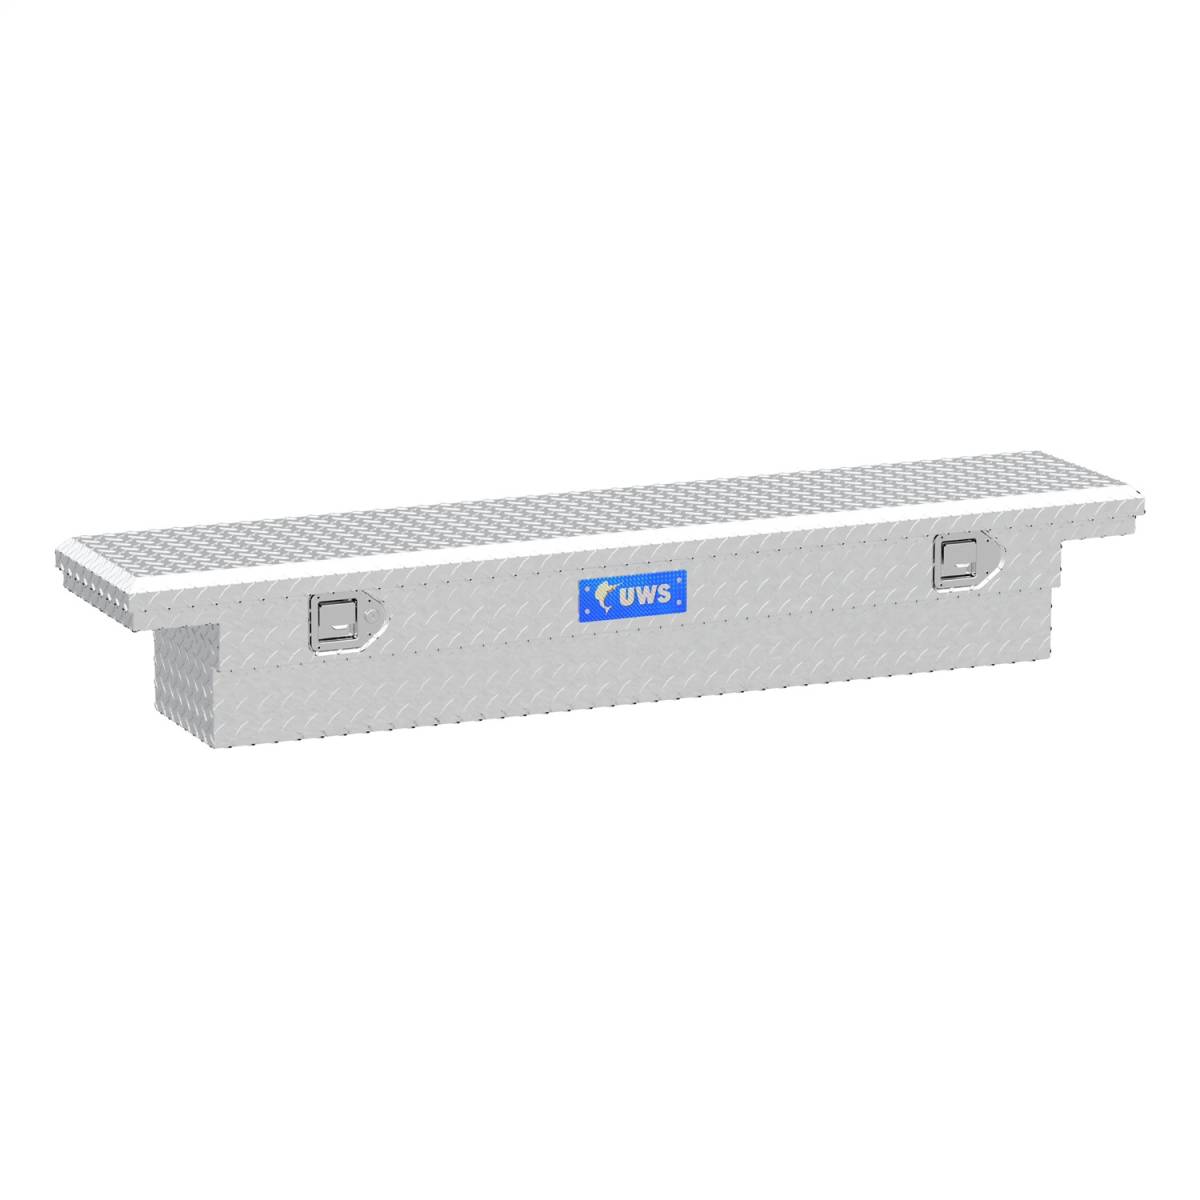 63 in. Slim-Line Crossover Truck Tool Box, UWS, EC10311 | Nelson Truck  Equipment and Accessories